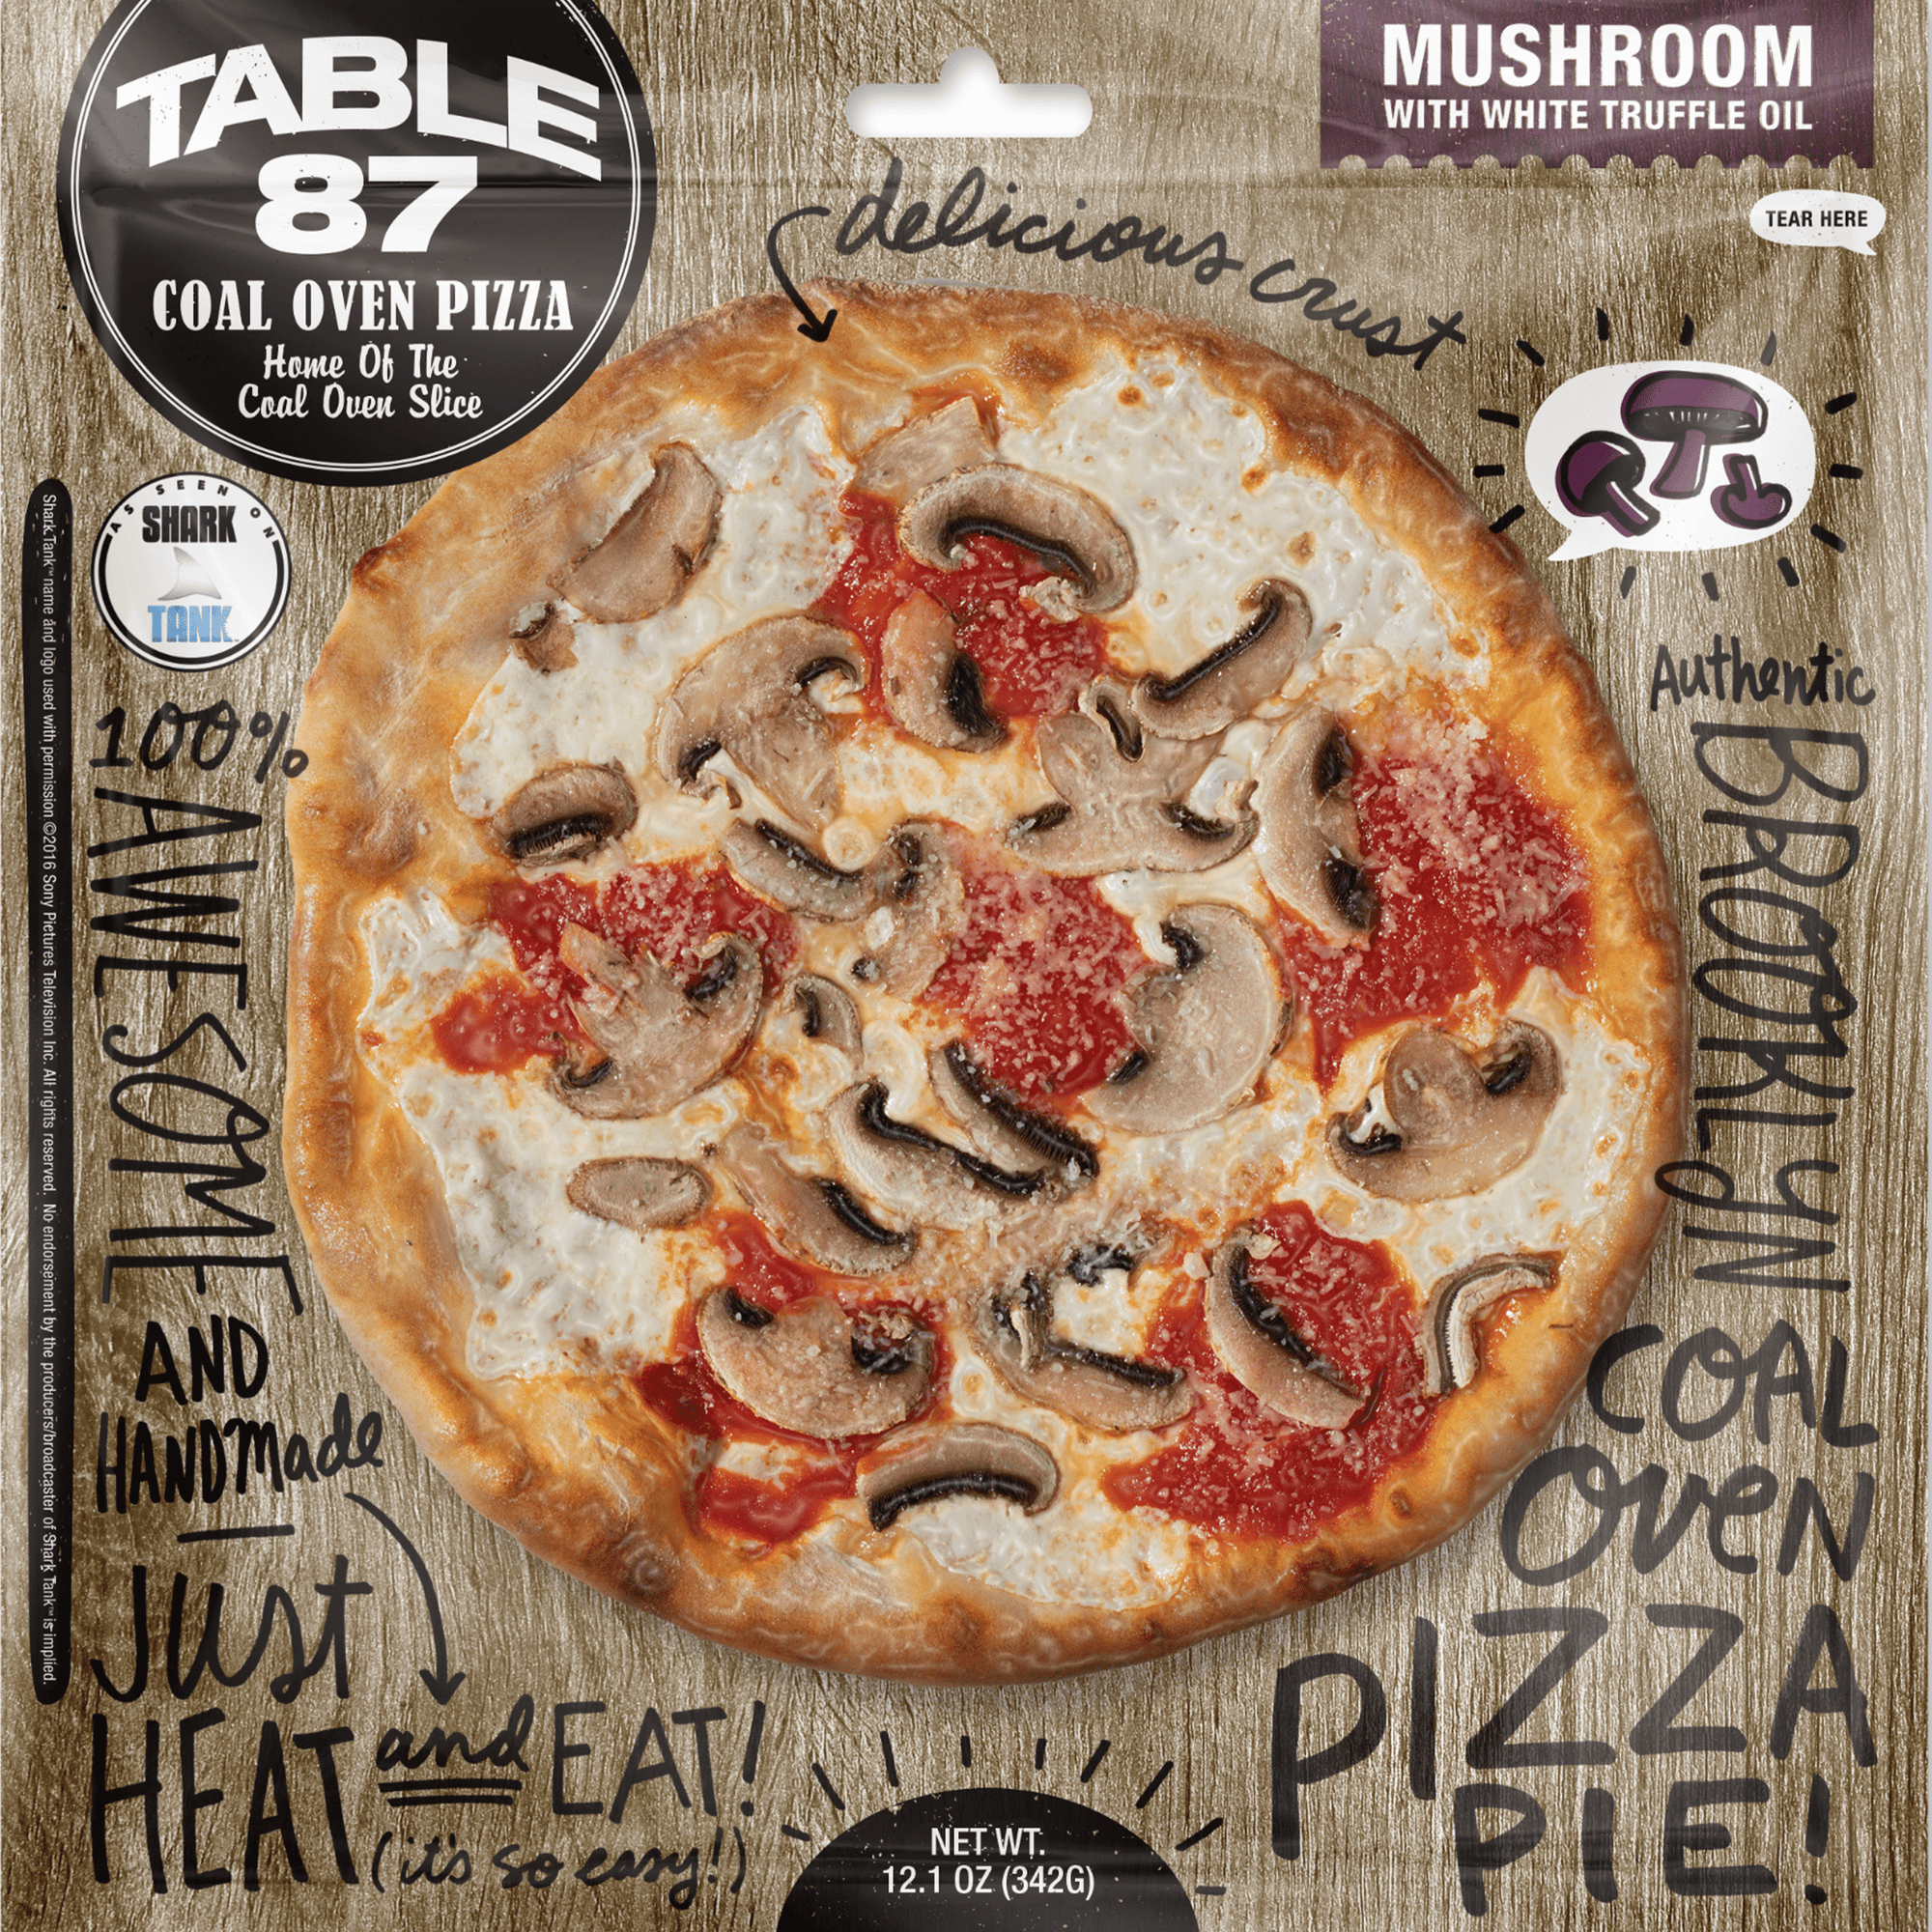 Coal Oven Mushroom with White Truffle Oil Pizza Pie 10" (6 Pies)